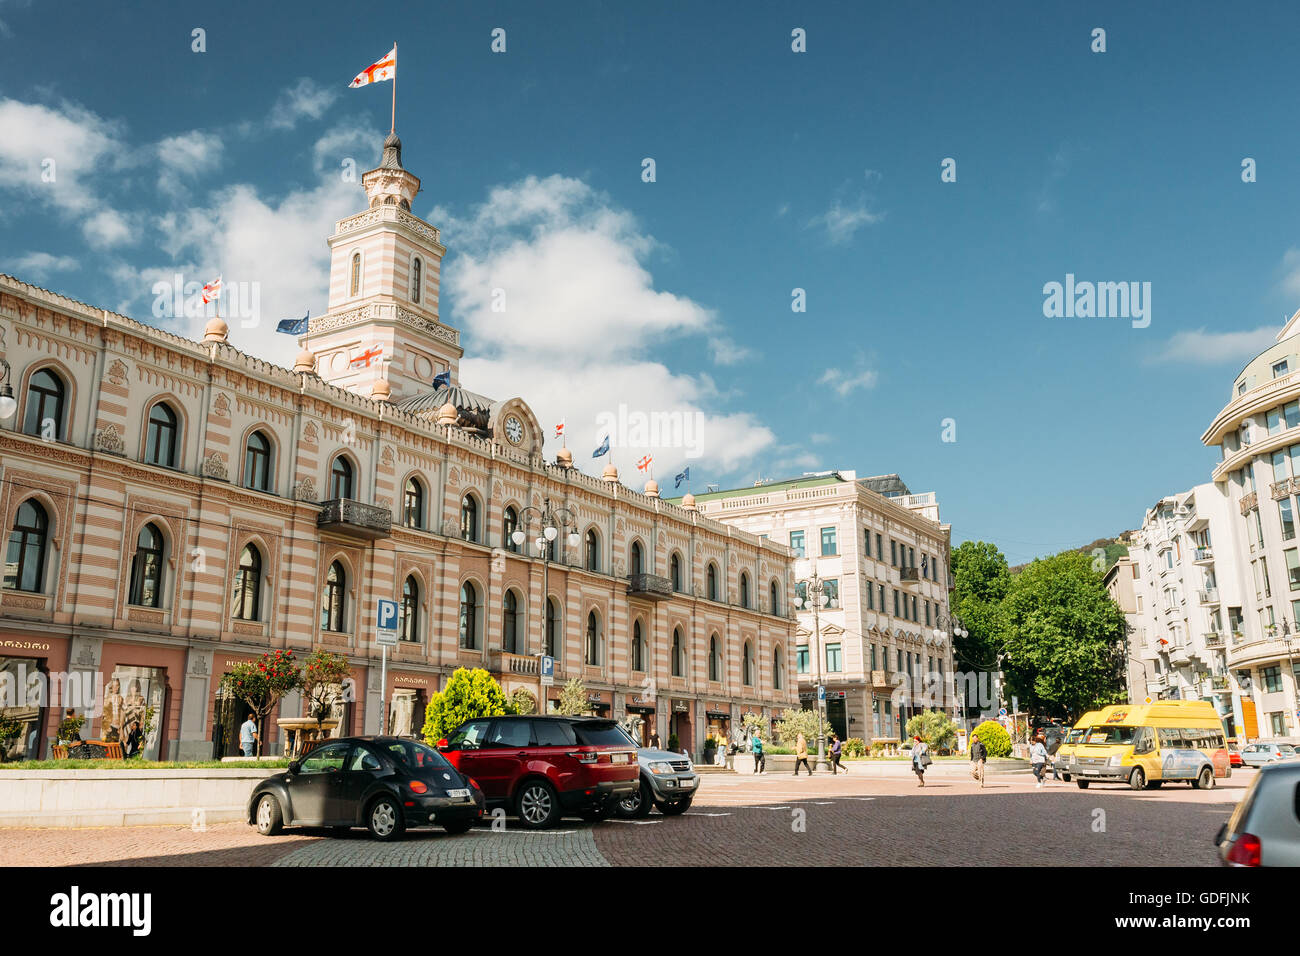 Tbilisi, Georgia - May 19, 2016: Tbilisi City Hall is a clock-towered edifice situated in the southern side of Freedom Square, T Stock Photo